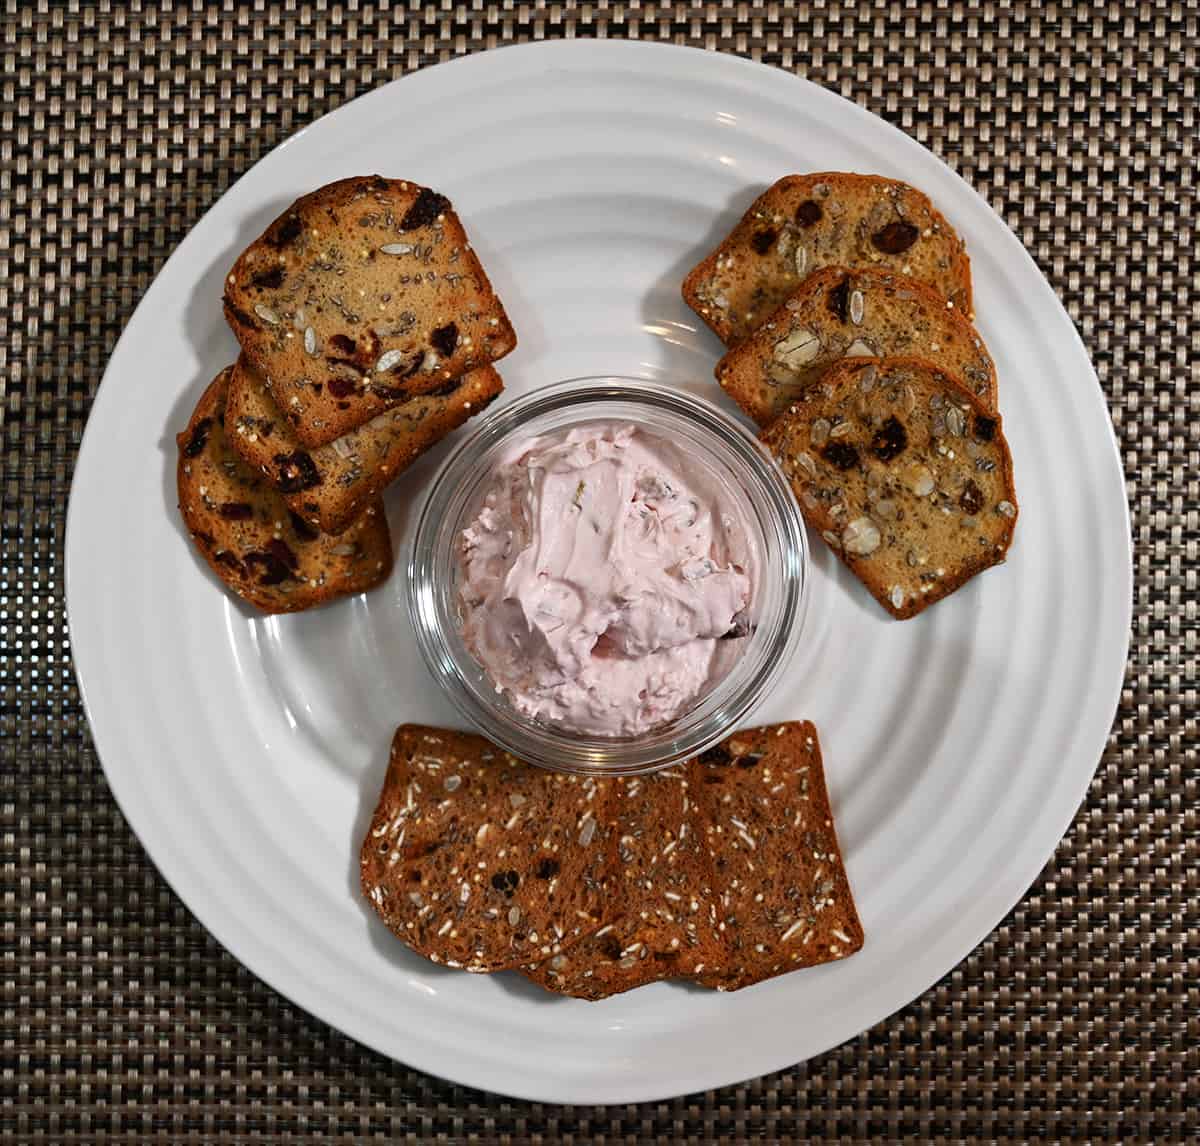 Top down image of the Diva's Delightful Crisps on a plate with a cranberry jalapeno dip in the center of the plate.